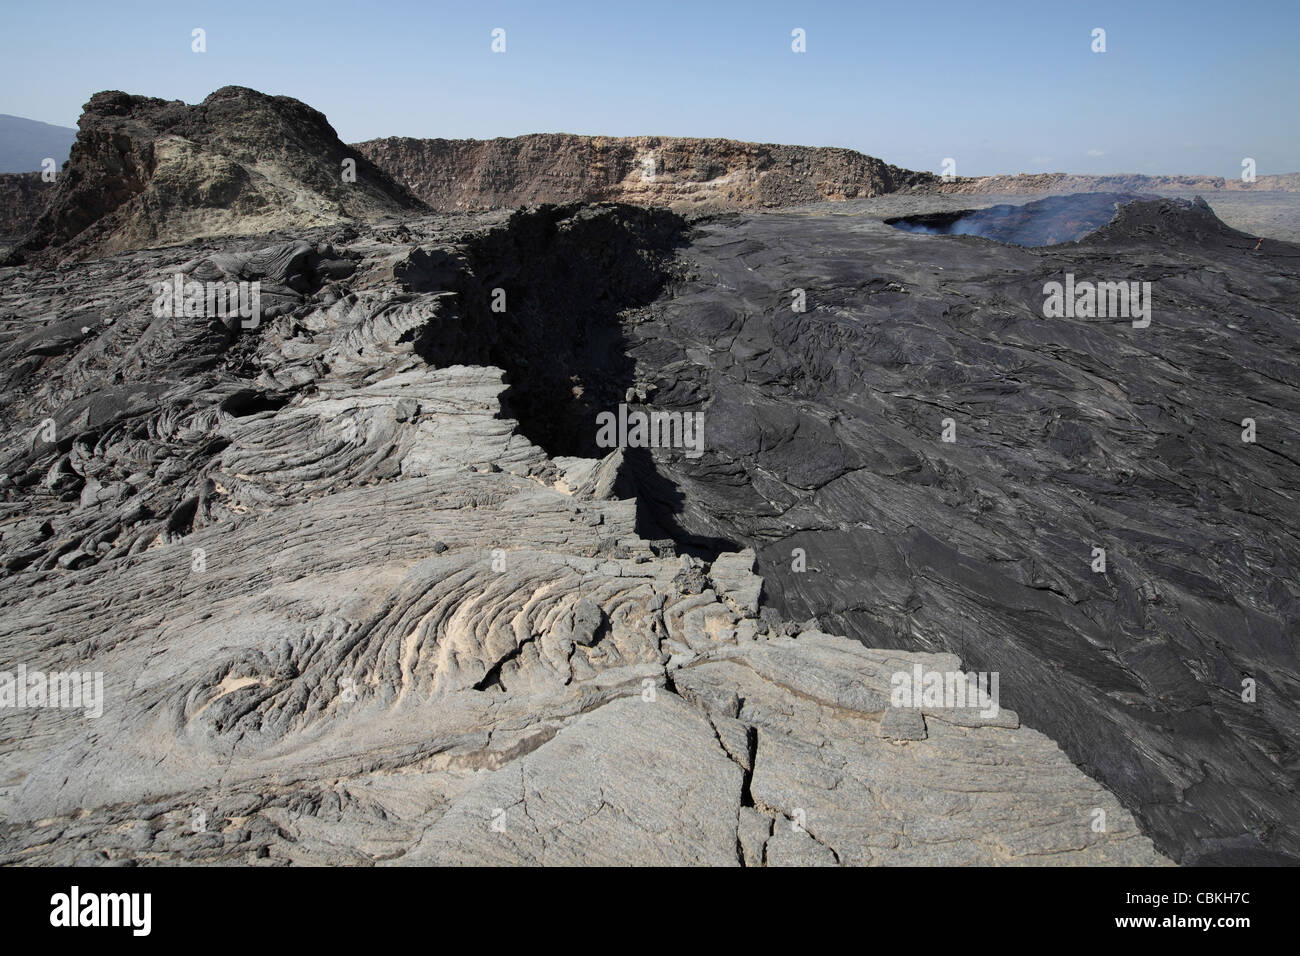 South pit crater filled by basaltic lava flows with inactive hornito to left, Erta Ale volcano, Danakil Depression, Ethiopia. Stock Photo